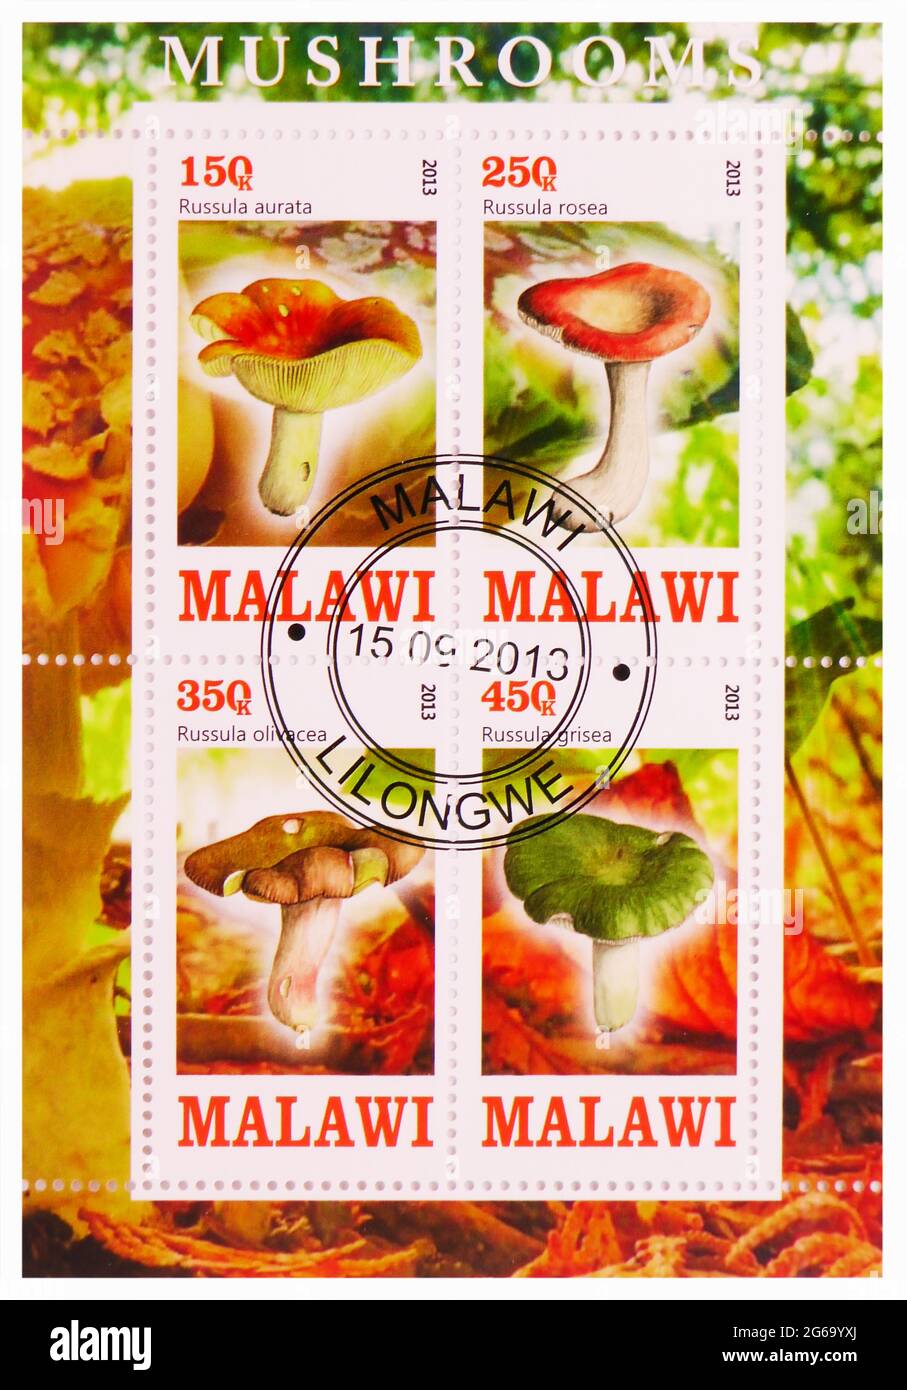 MOSCOW, RUSSIA - MARCH 28, 2020: Four postage stamps printed in Malawi shows Mushrooms serie, circa 2013 Stock Photo